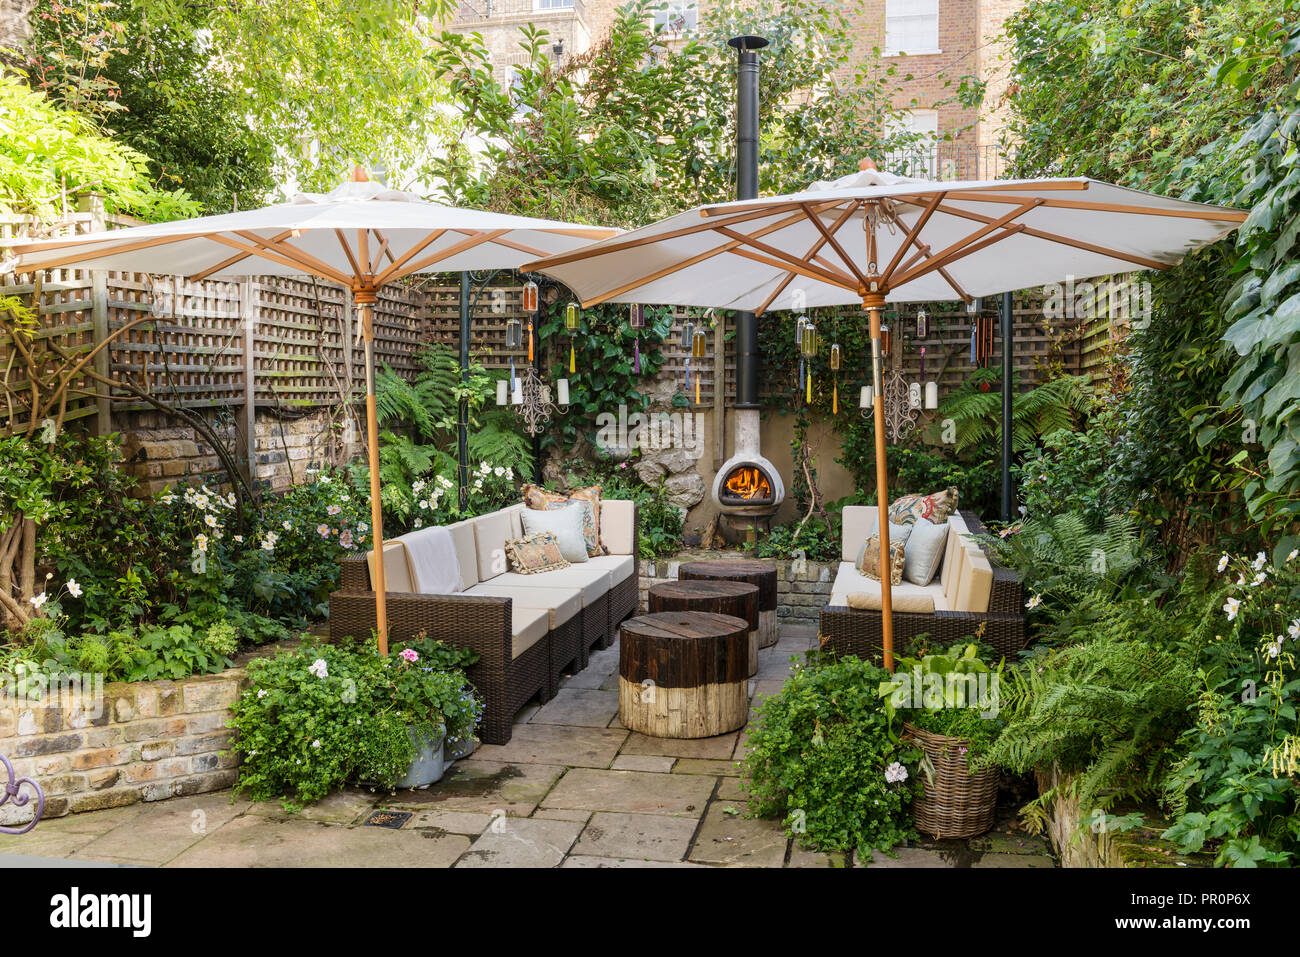 London courtyard garden fenced with trellis in the shade of parasols Stock Photo